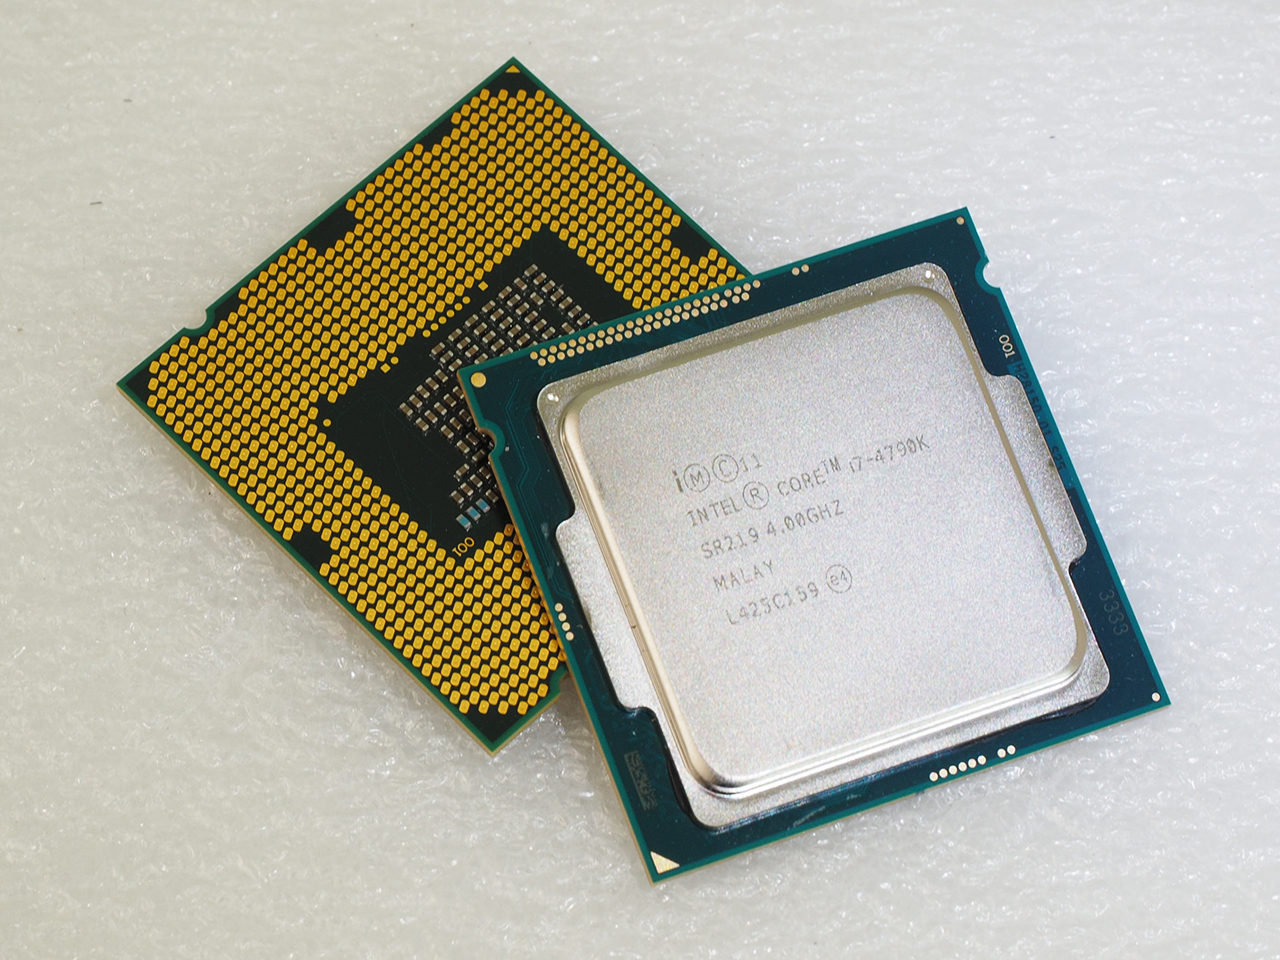 FRONTIER サポートFAQ90770　Intel® Core™ i7-4790K Processor (8M Cache, up to 4.40 GHz)